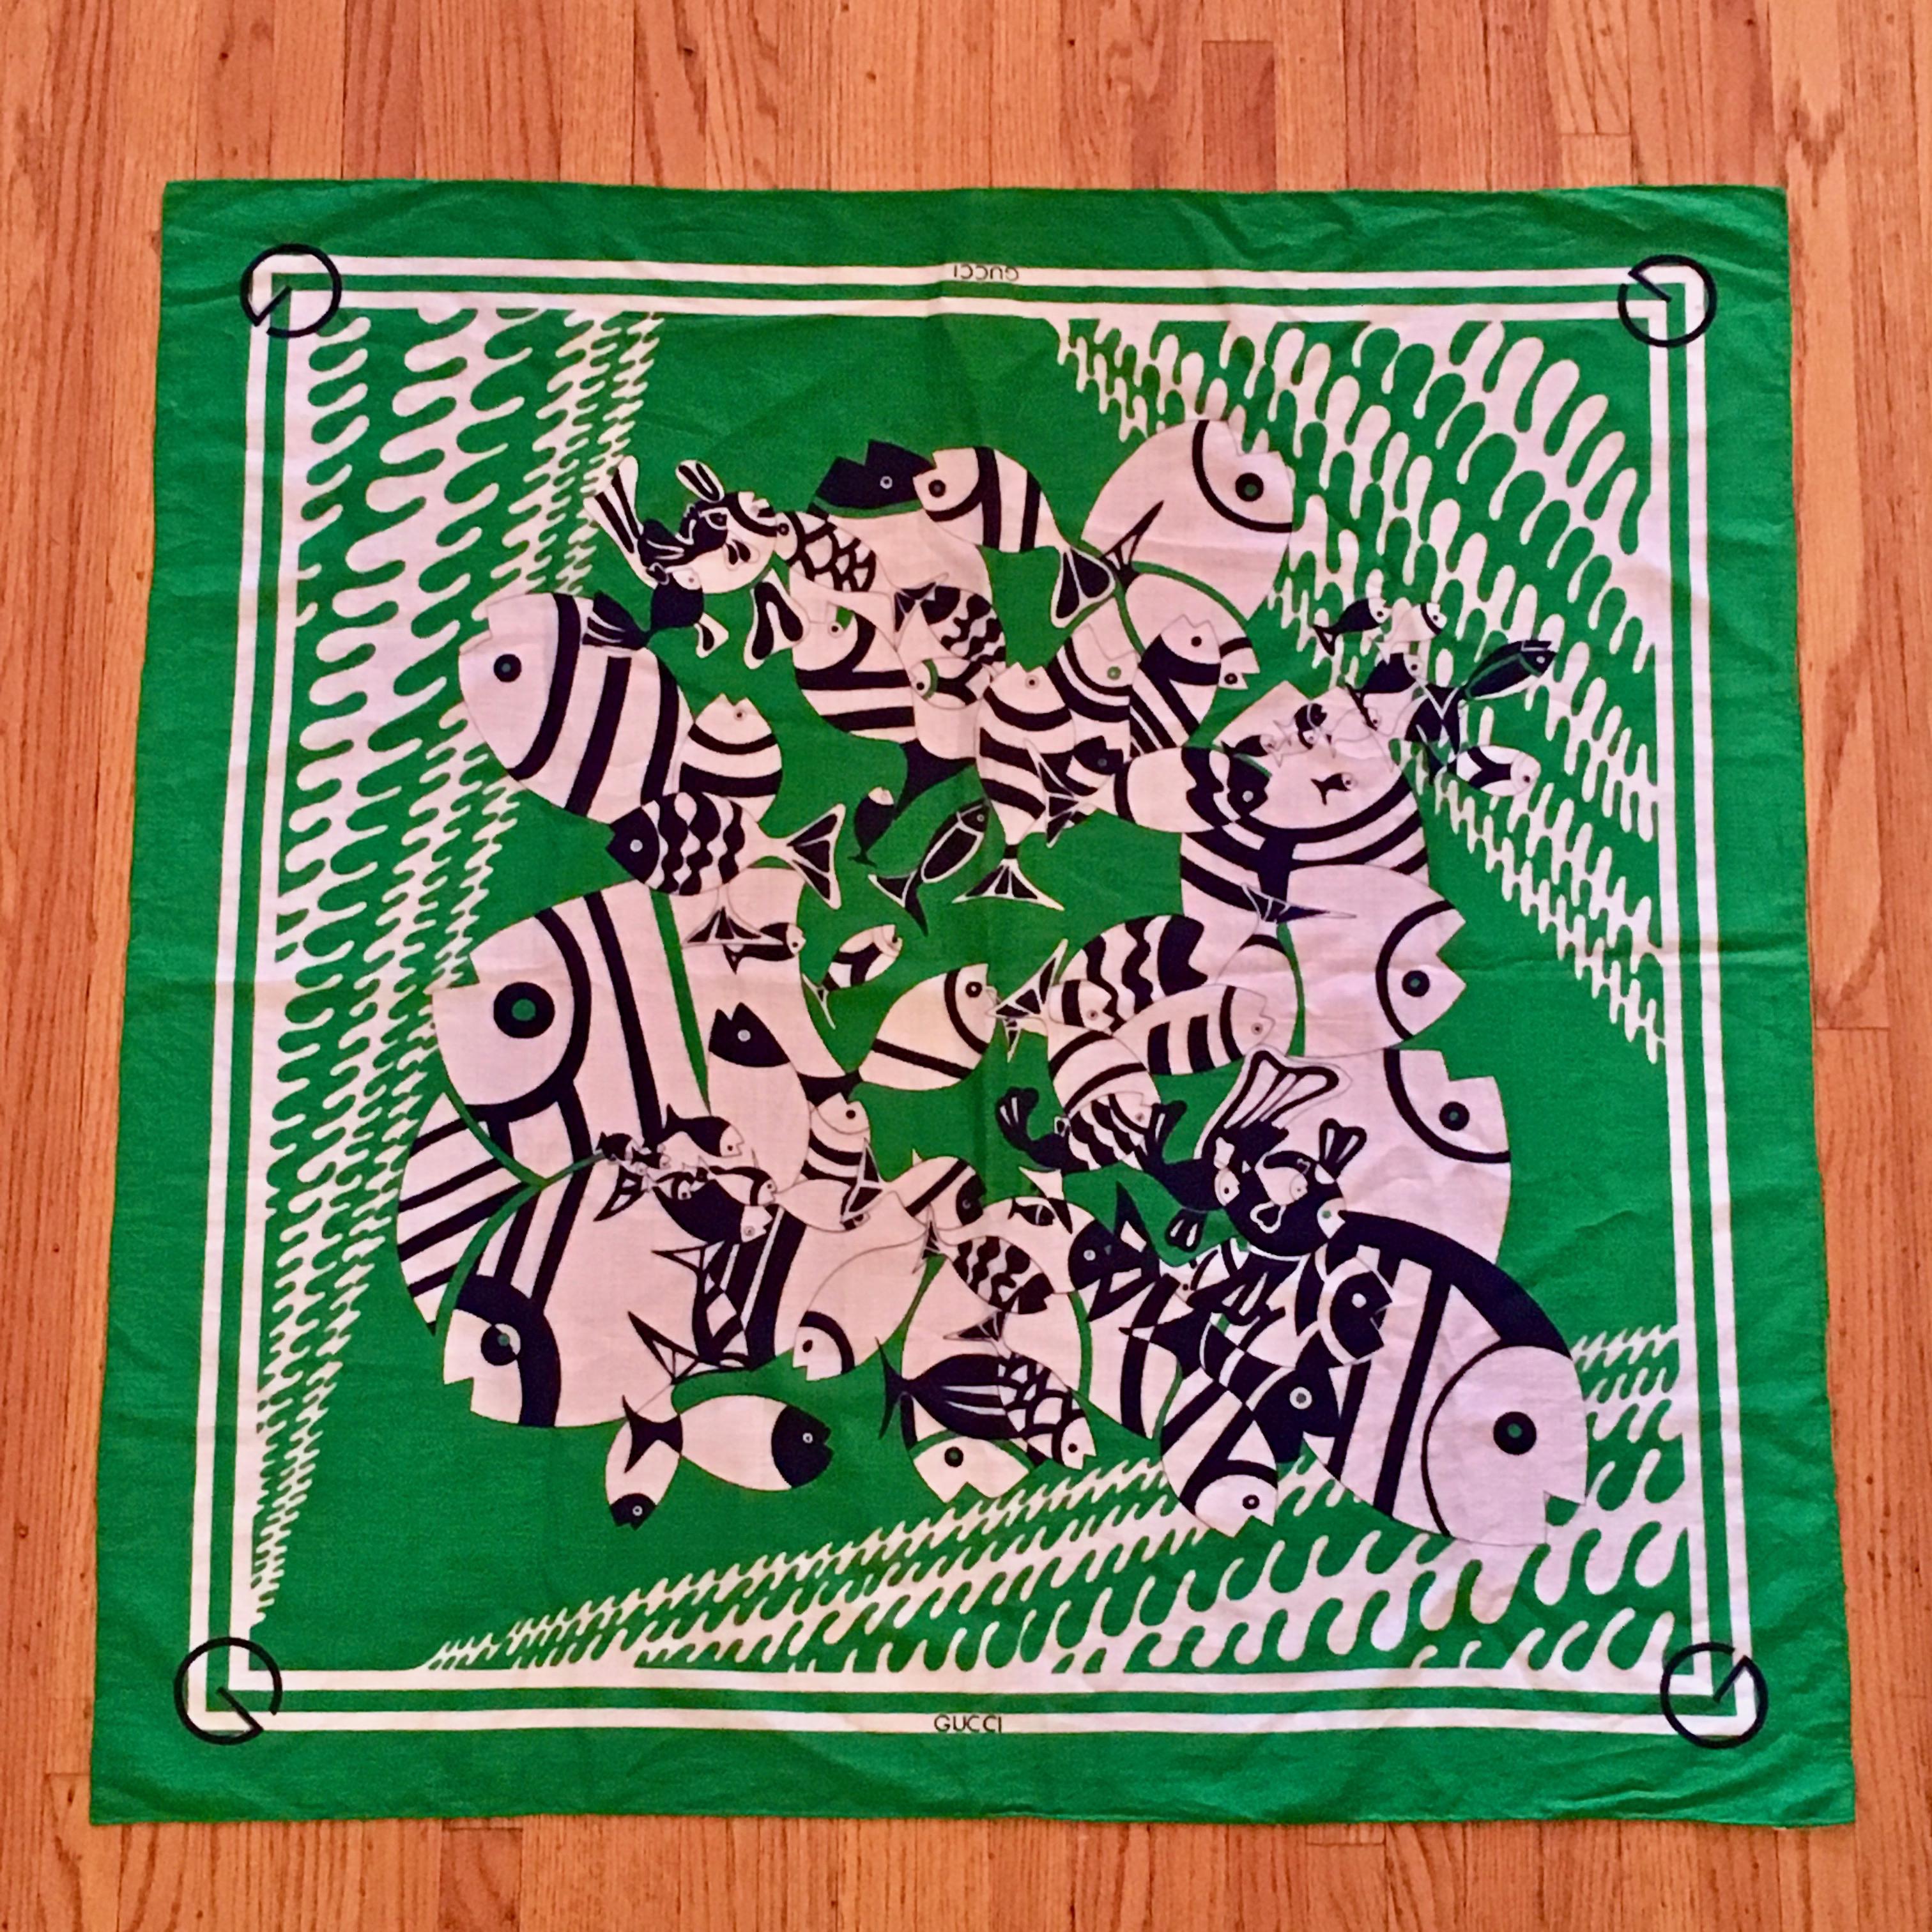 This is a fabulous and rare 1970s MOD cotton Gucci scarf featuring a green, navy and white fish print - such a fun period piece. The edges are hand-rolled and stitched. Each corner features a navy Gucci 'G'. On the back there is a tag that reads